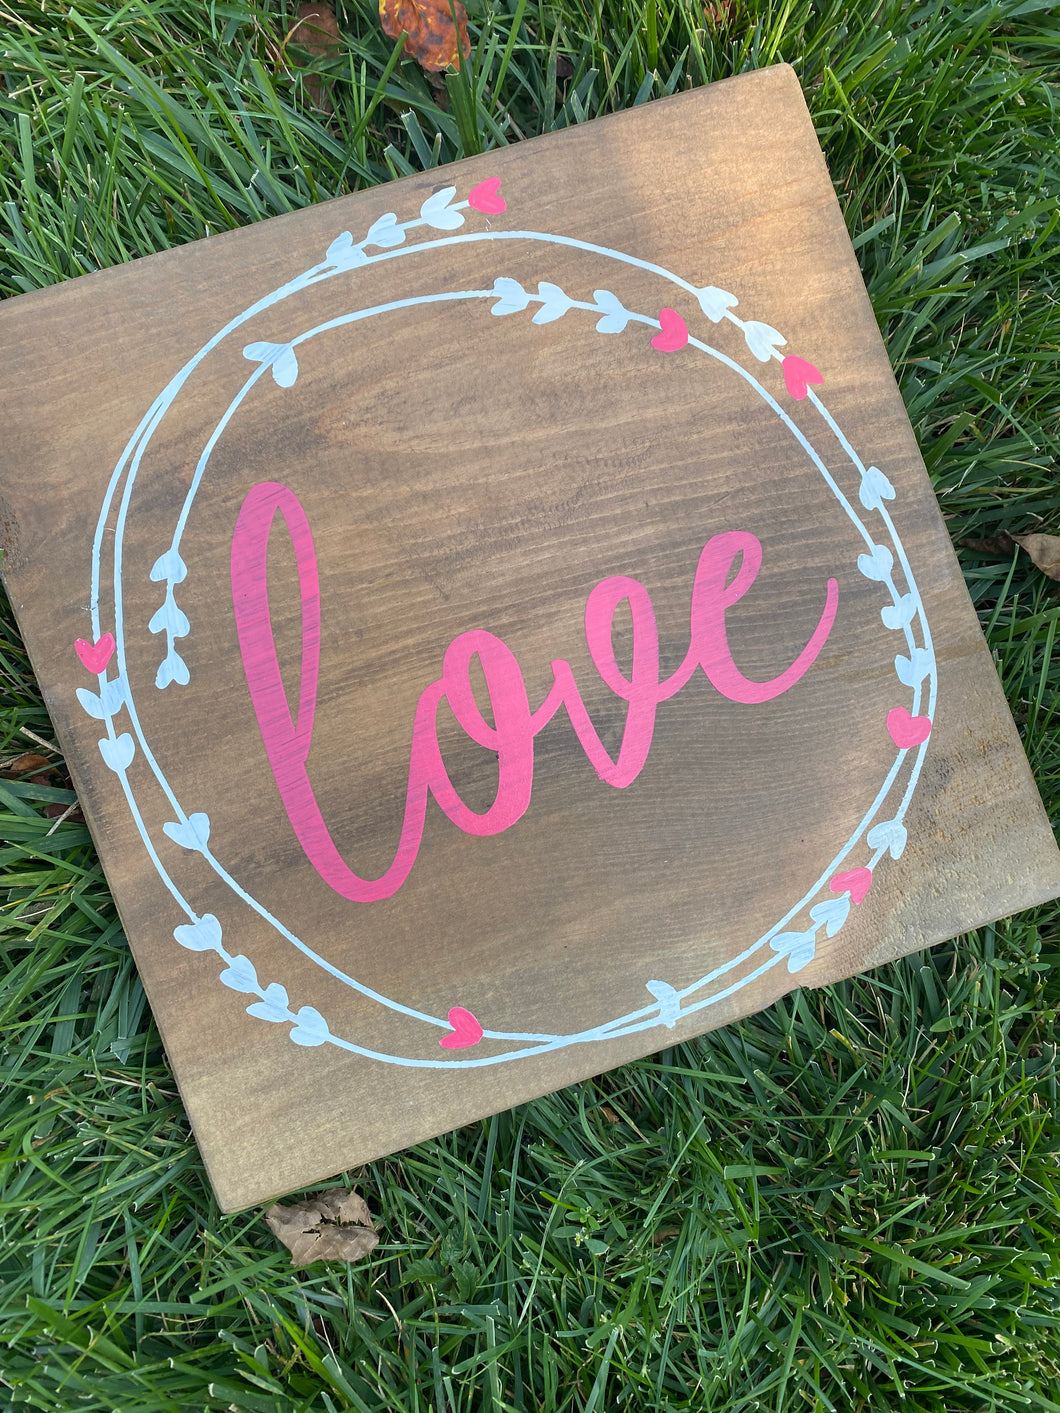 Love Wooden Sign